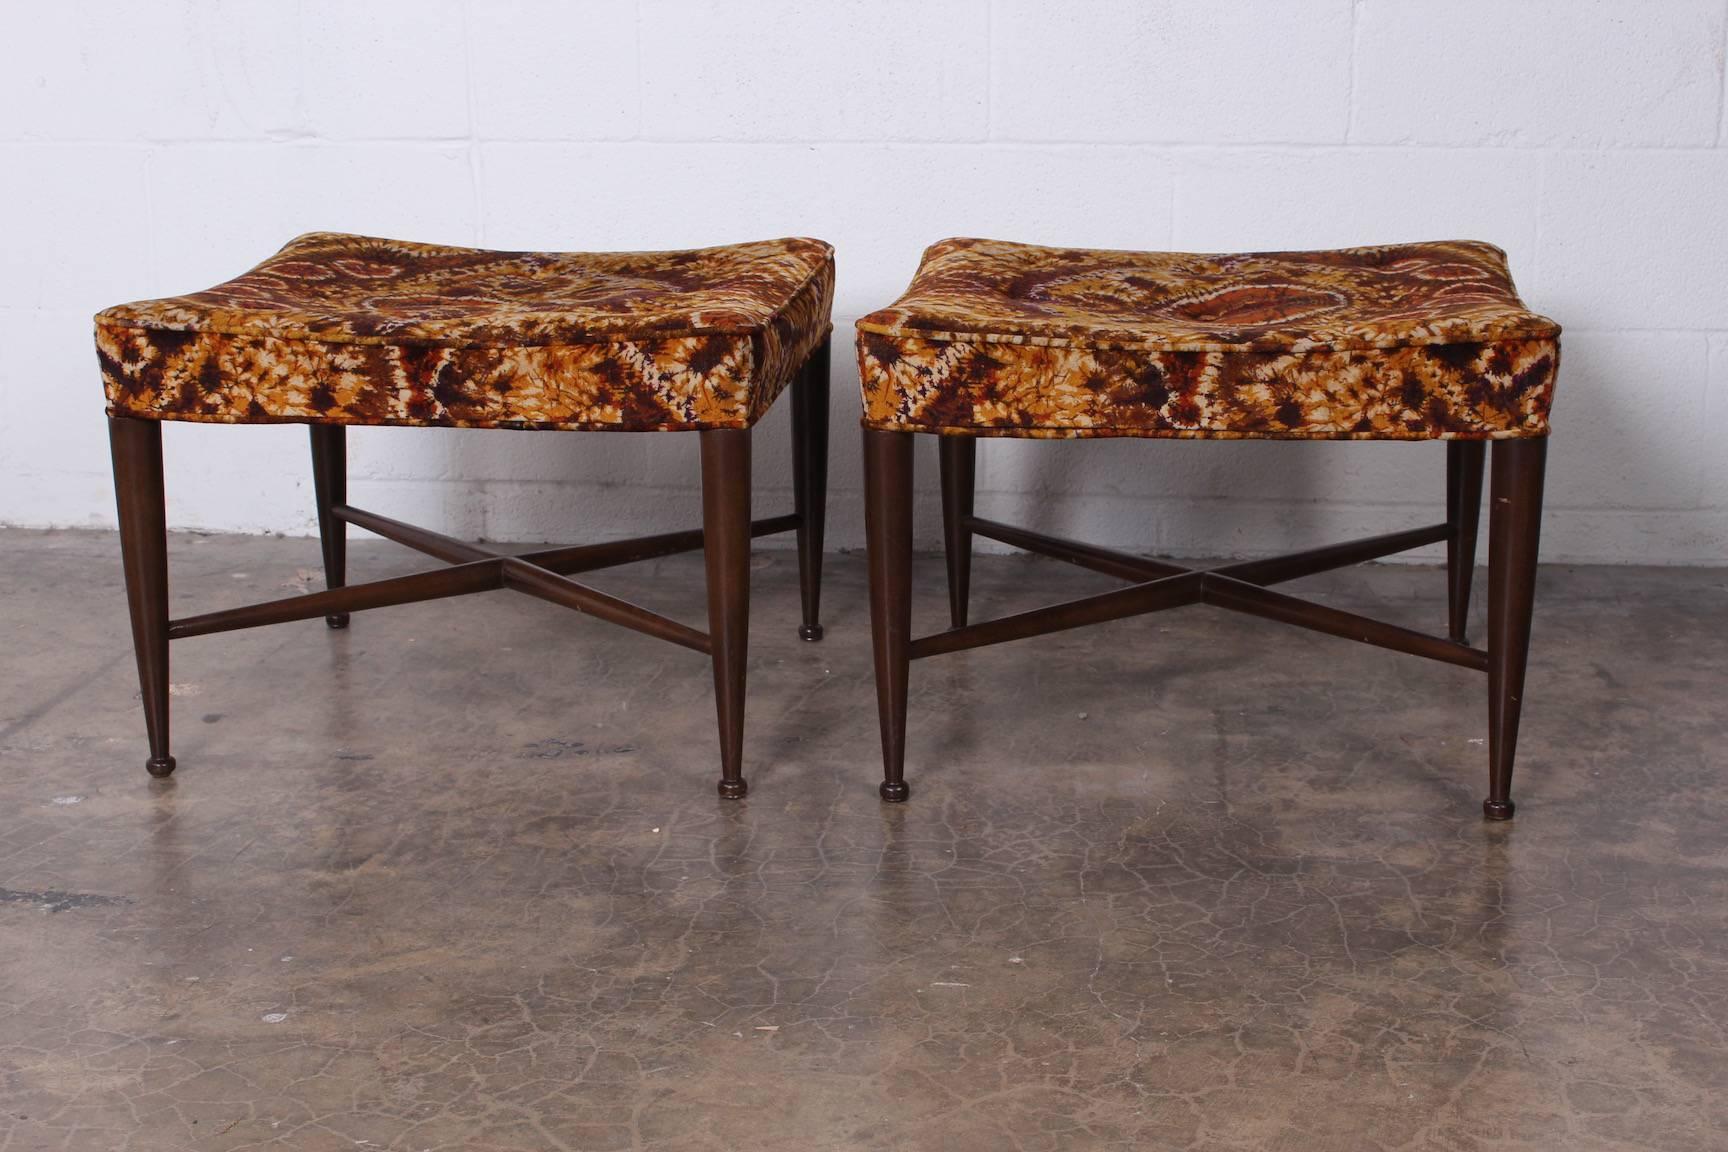 Pair of Thebes Stools by Edward Wormley for Dunbar 1